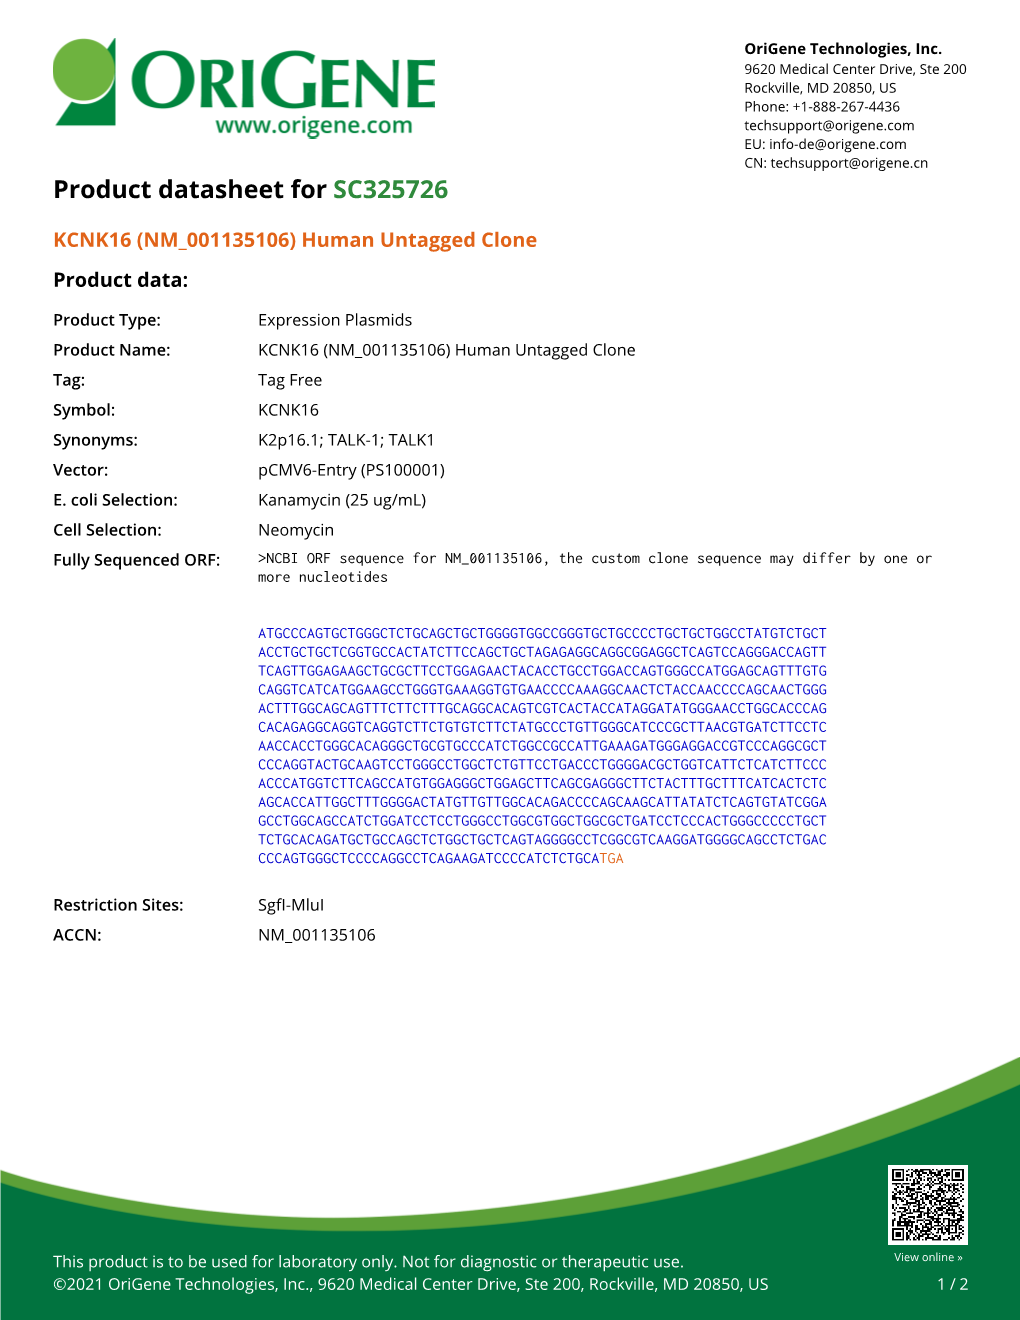 KCNK16 (NM 001135106) Human Untagged Clone Product Data